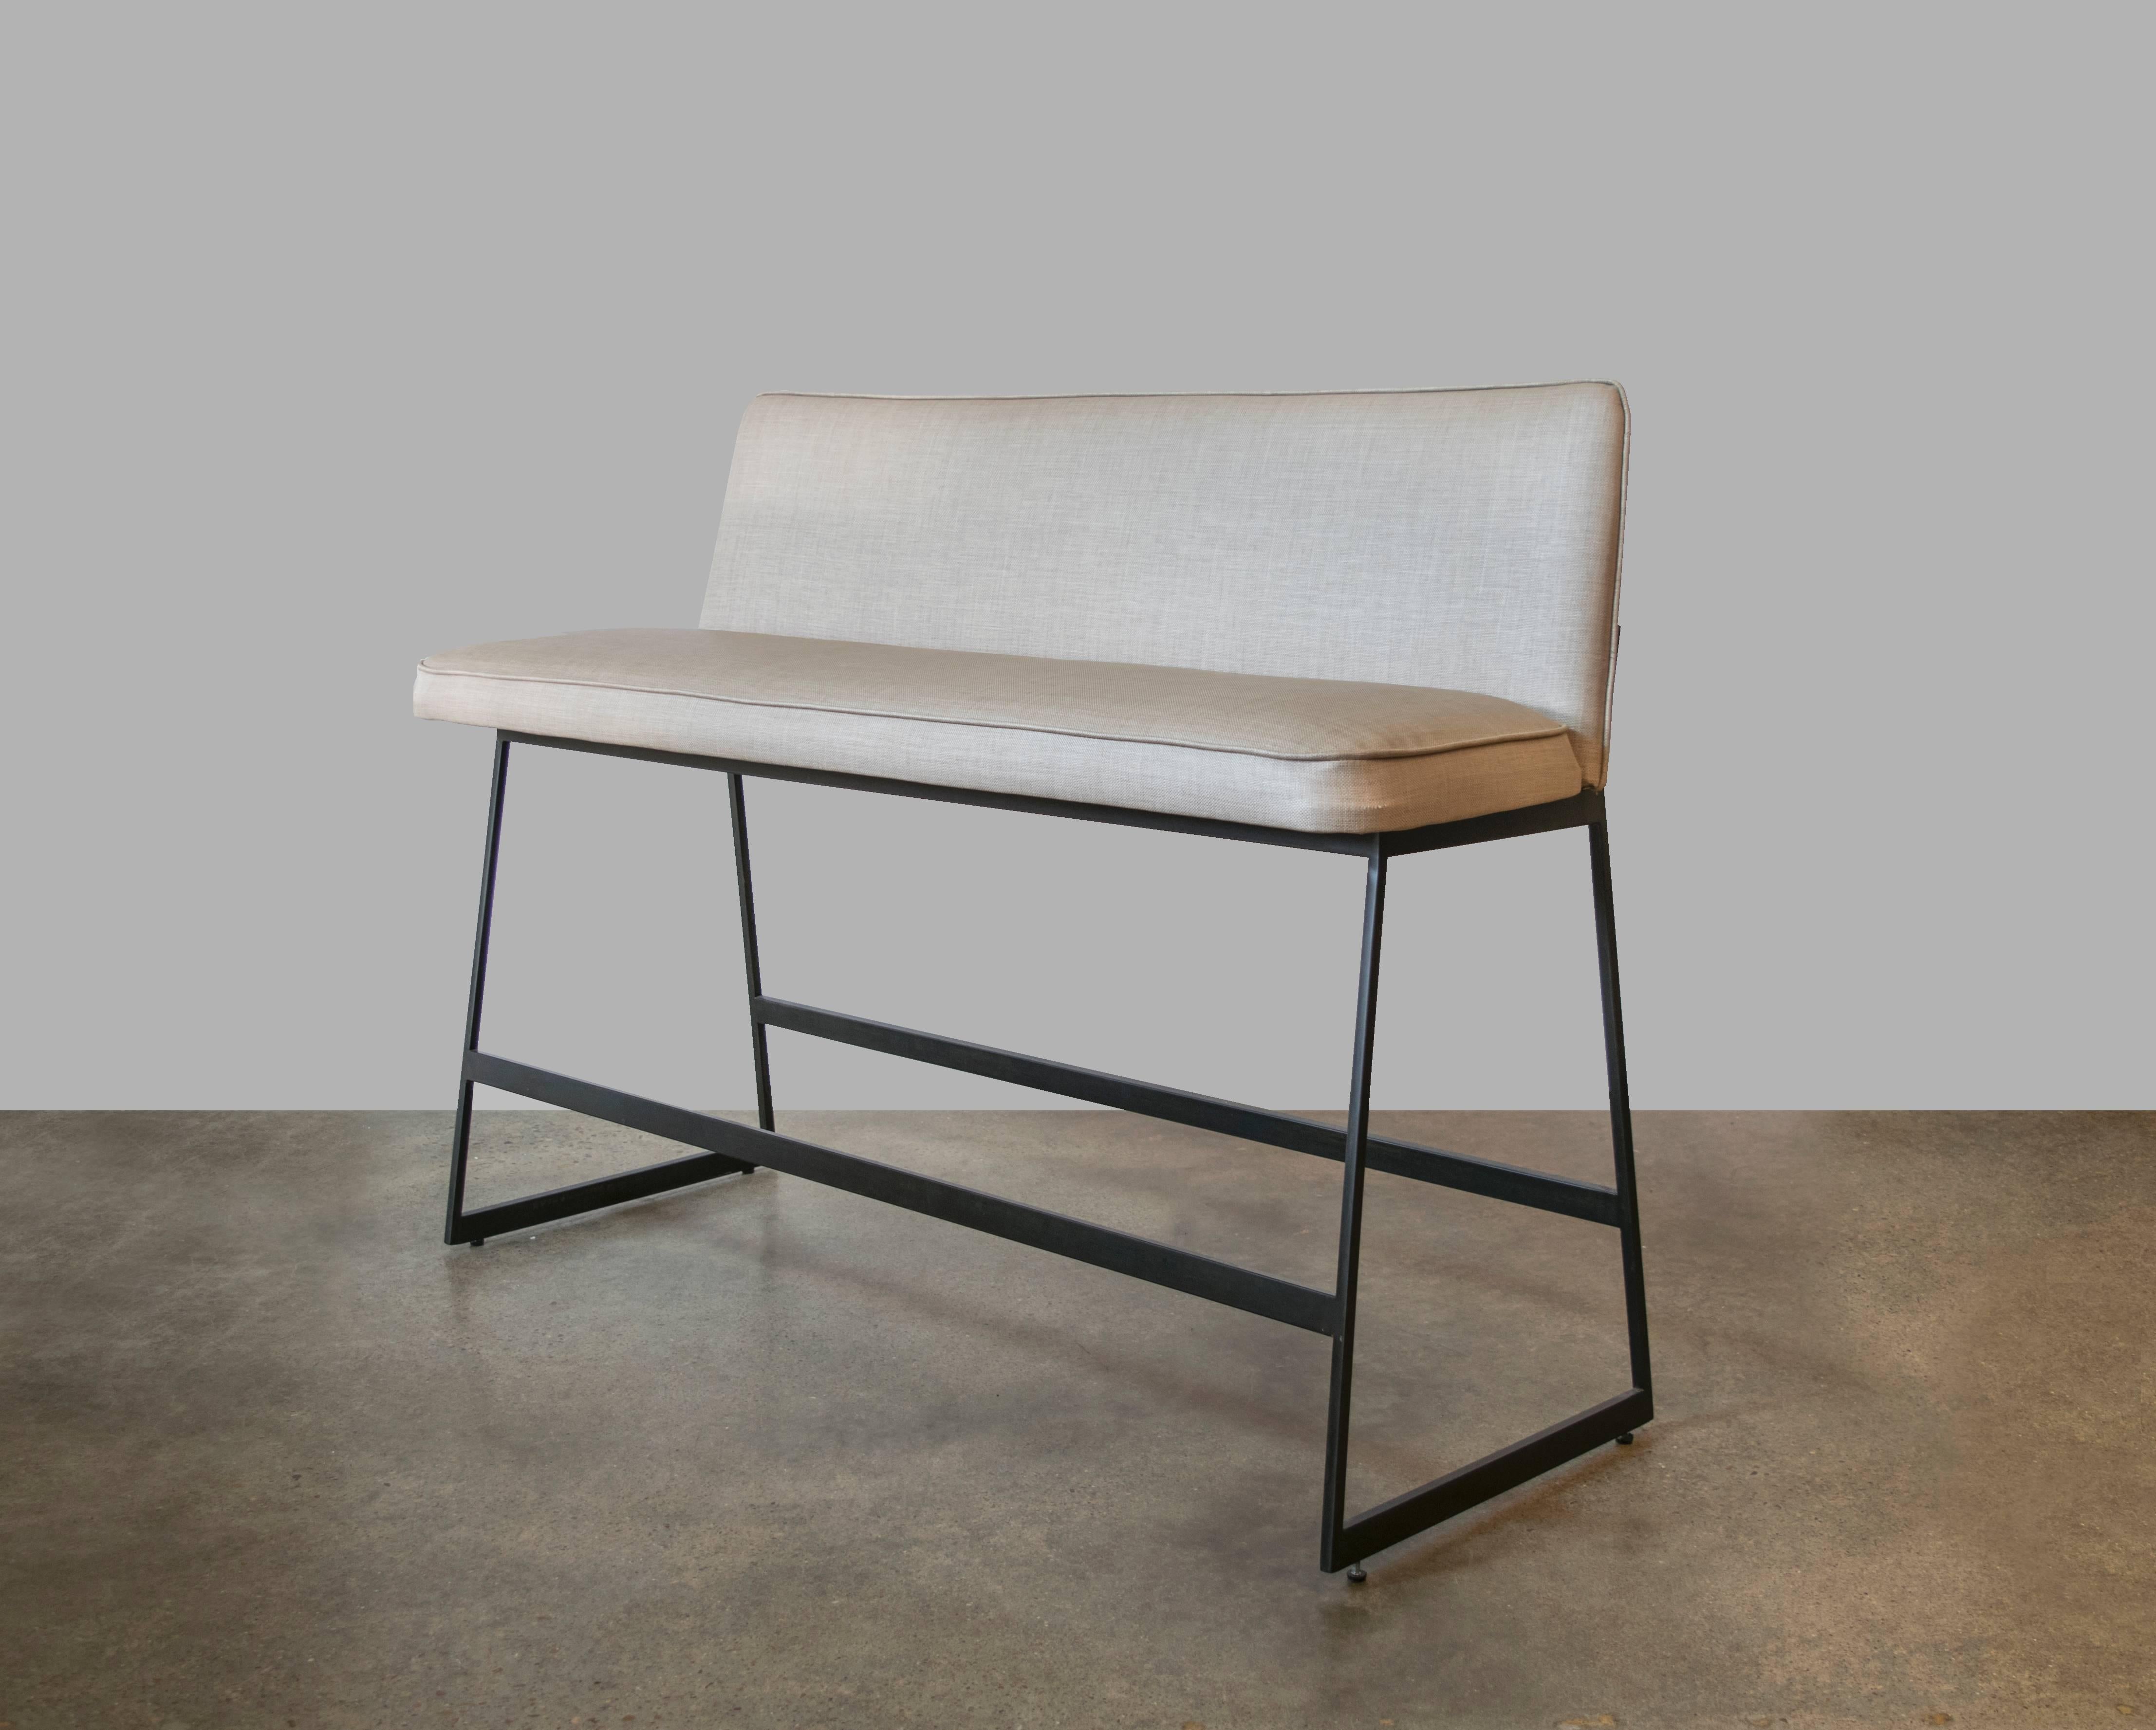 Beautiful counter height benches by Gimo Fero that are covered in the original linen vinyl. Back profile is elegantly minimal. Benches are sold as a pair but could also be sold separately.